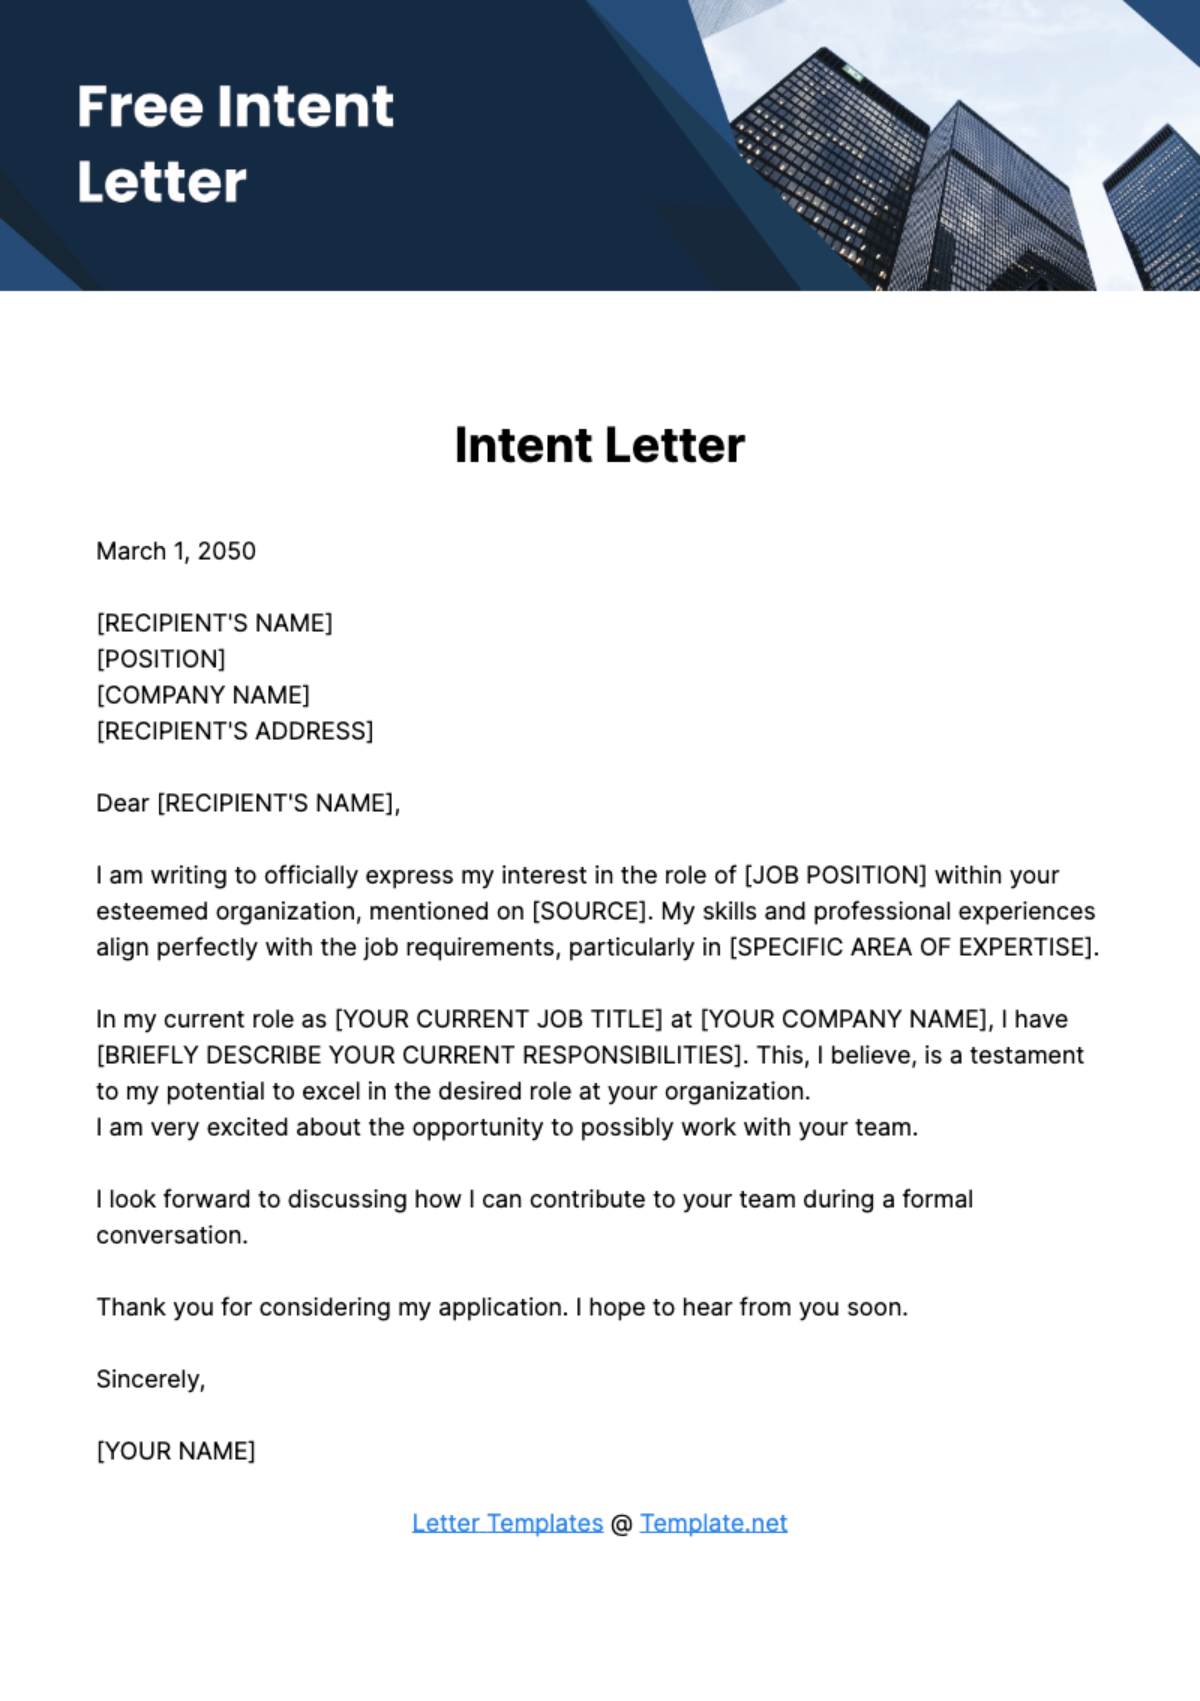 Free Intent Letter Template